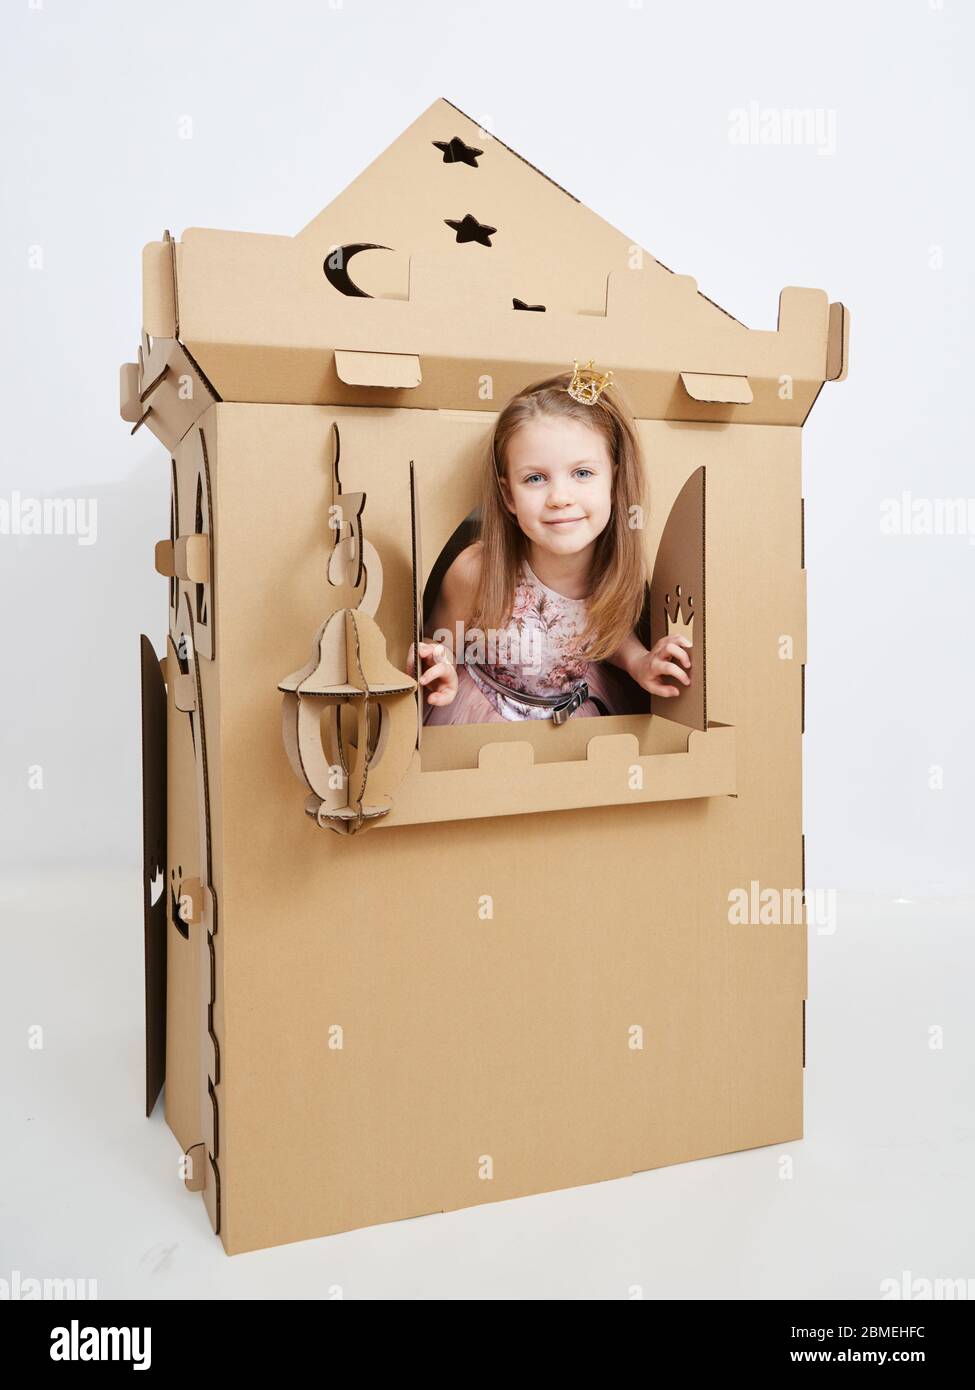 The princess play with cardboard castle tower. Stock Photo